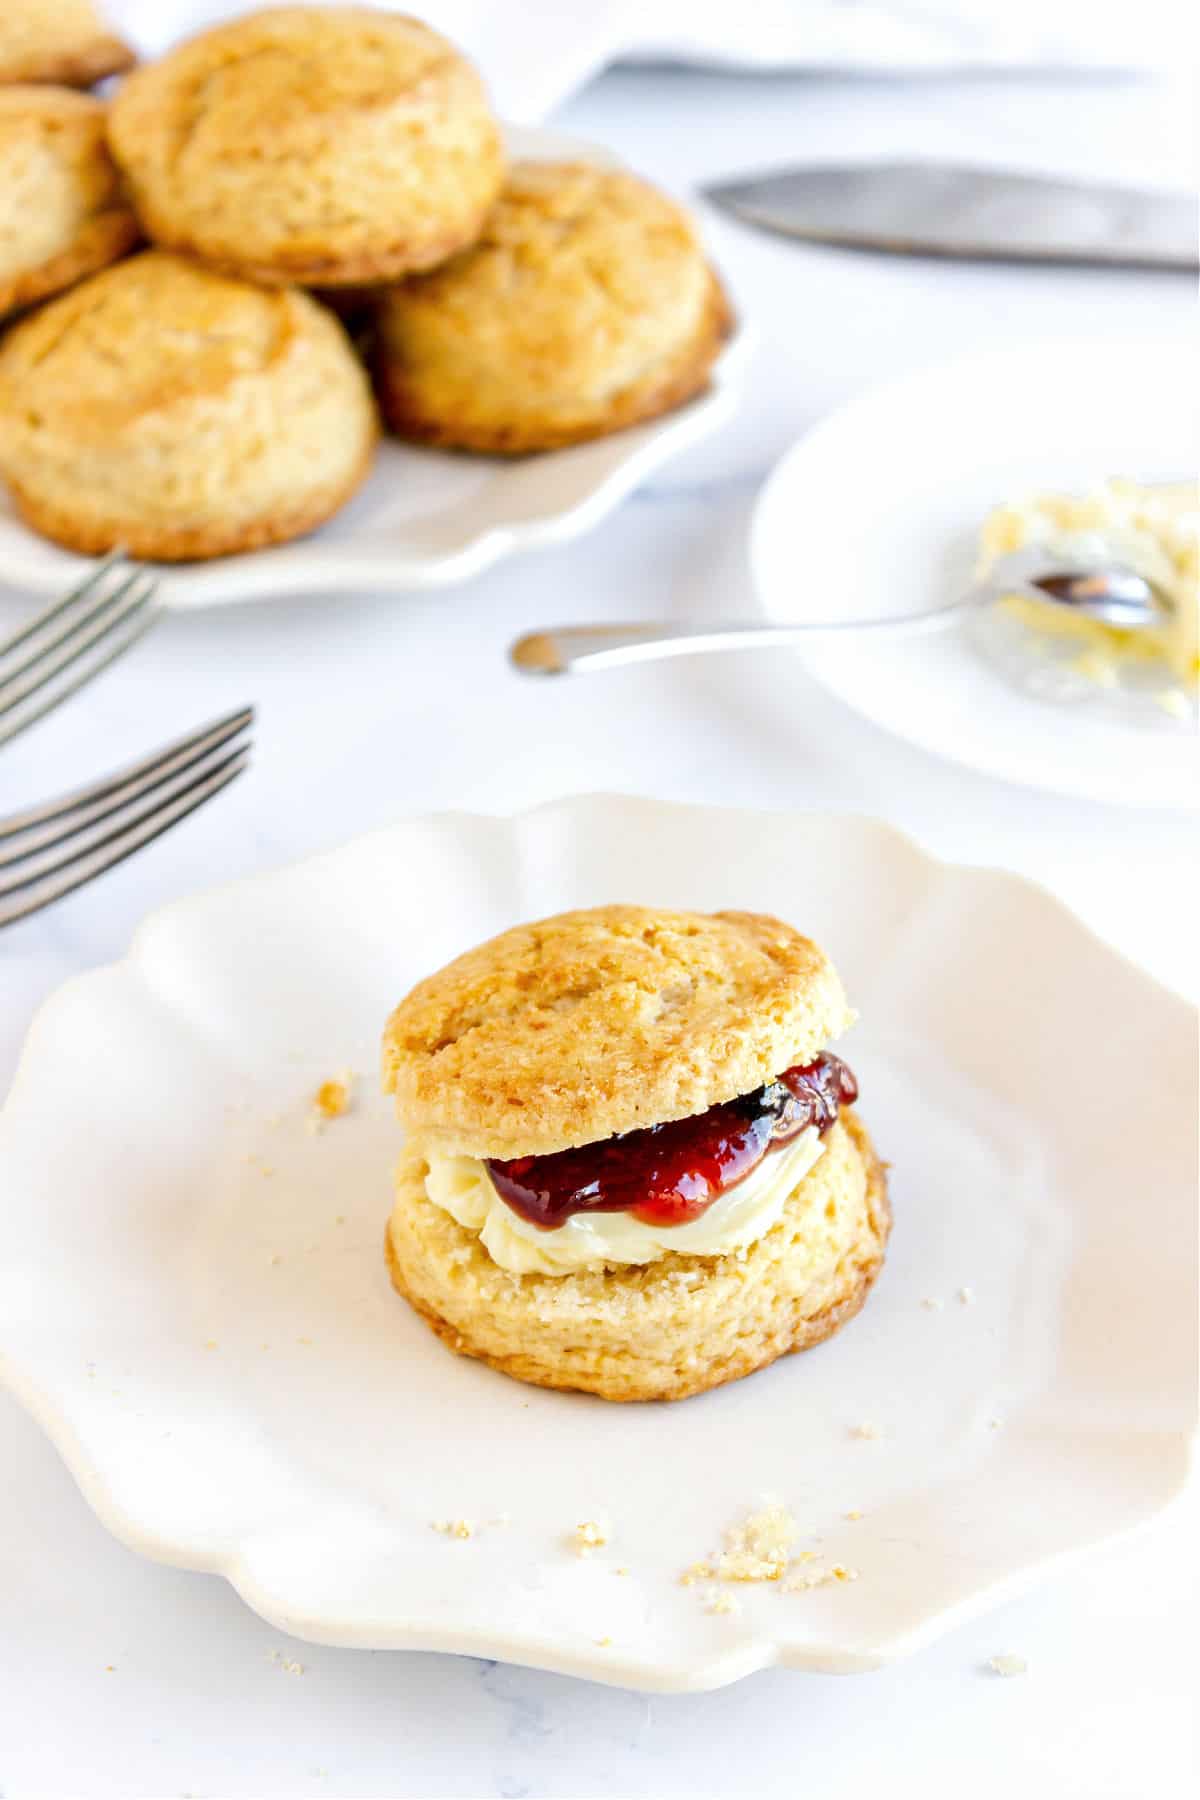 Butter and jam filled scone on a plate. White background with more scones and cutlery.